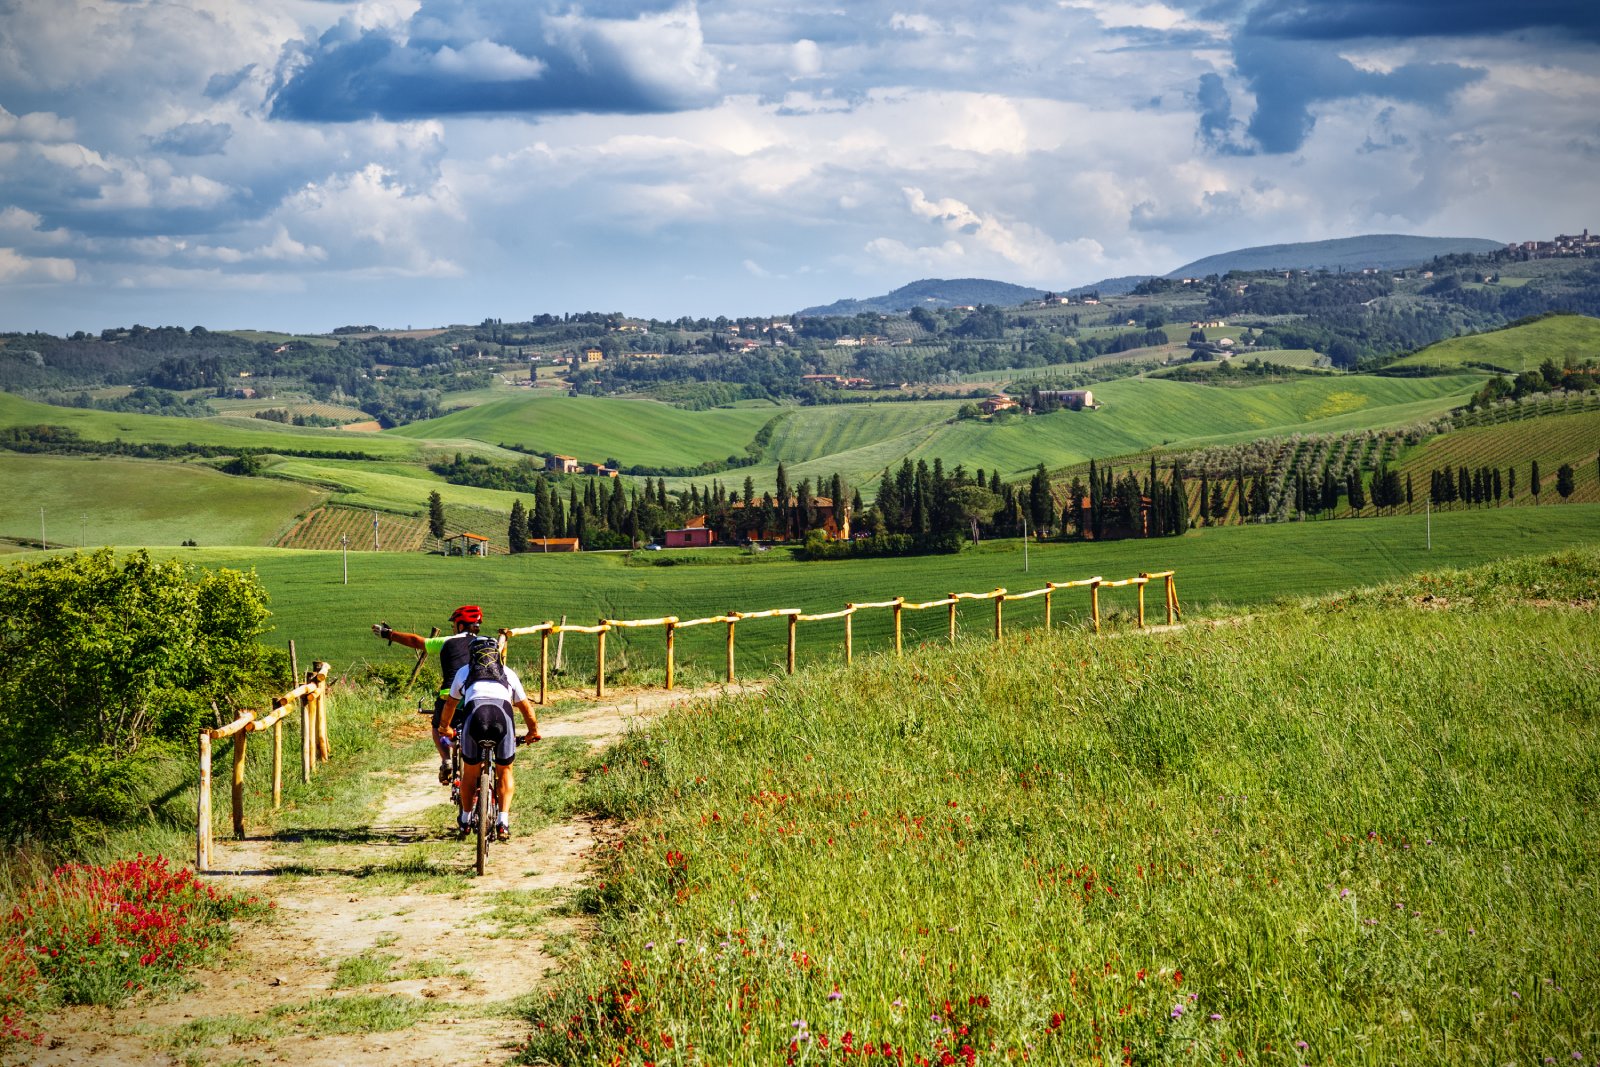 <p>Tuscany is known for its low crime rates and safe environment, providing retirees with peace of mind as they enjoy their retirement years. Whether exploring the countryside or strolling through town, residents can feel secure in their surroundings.</p>